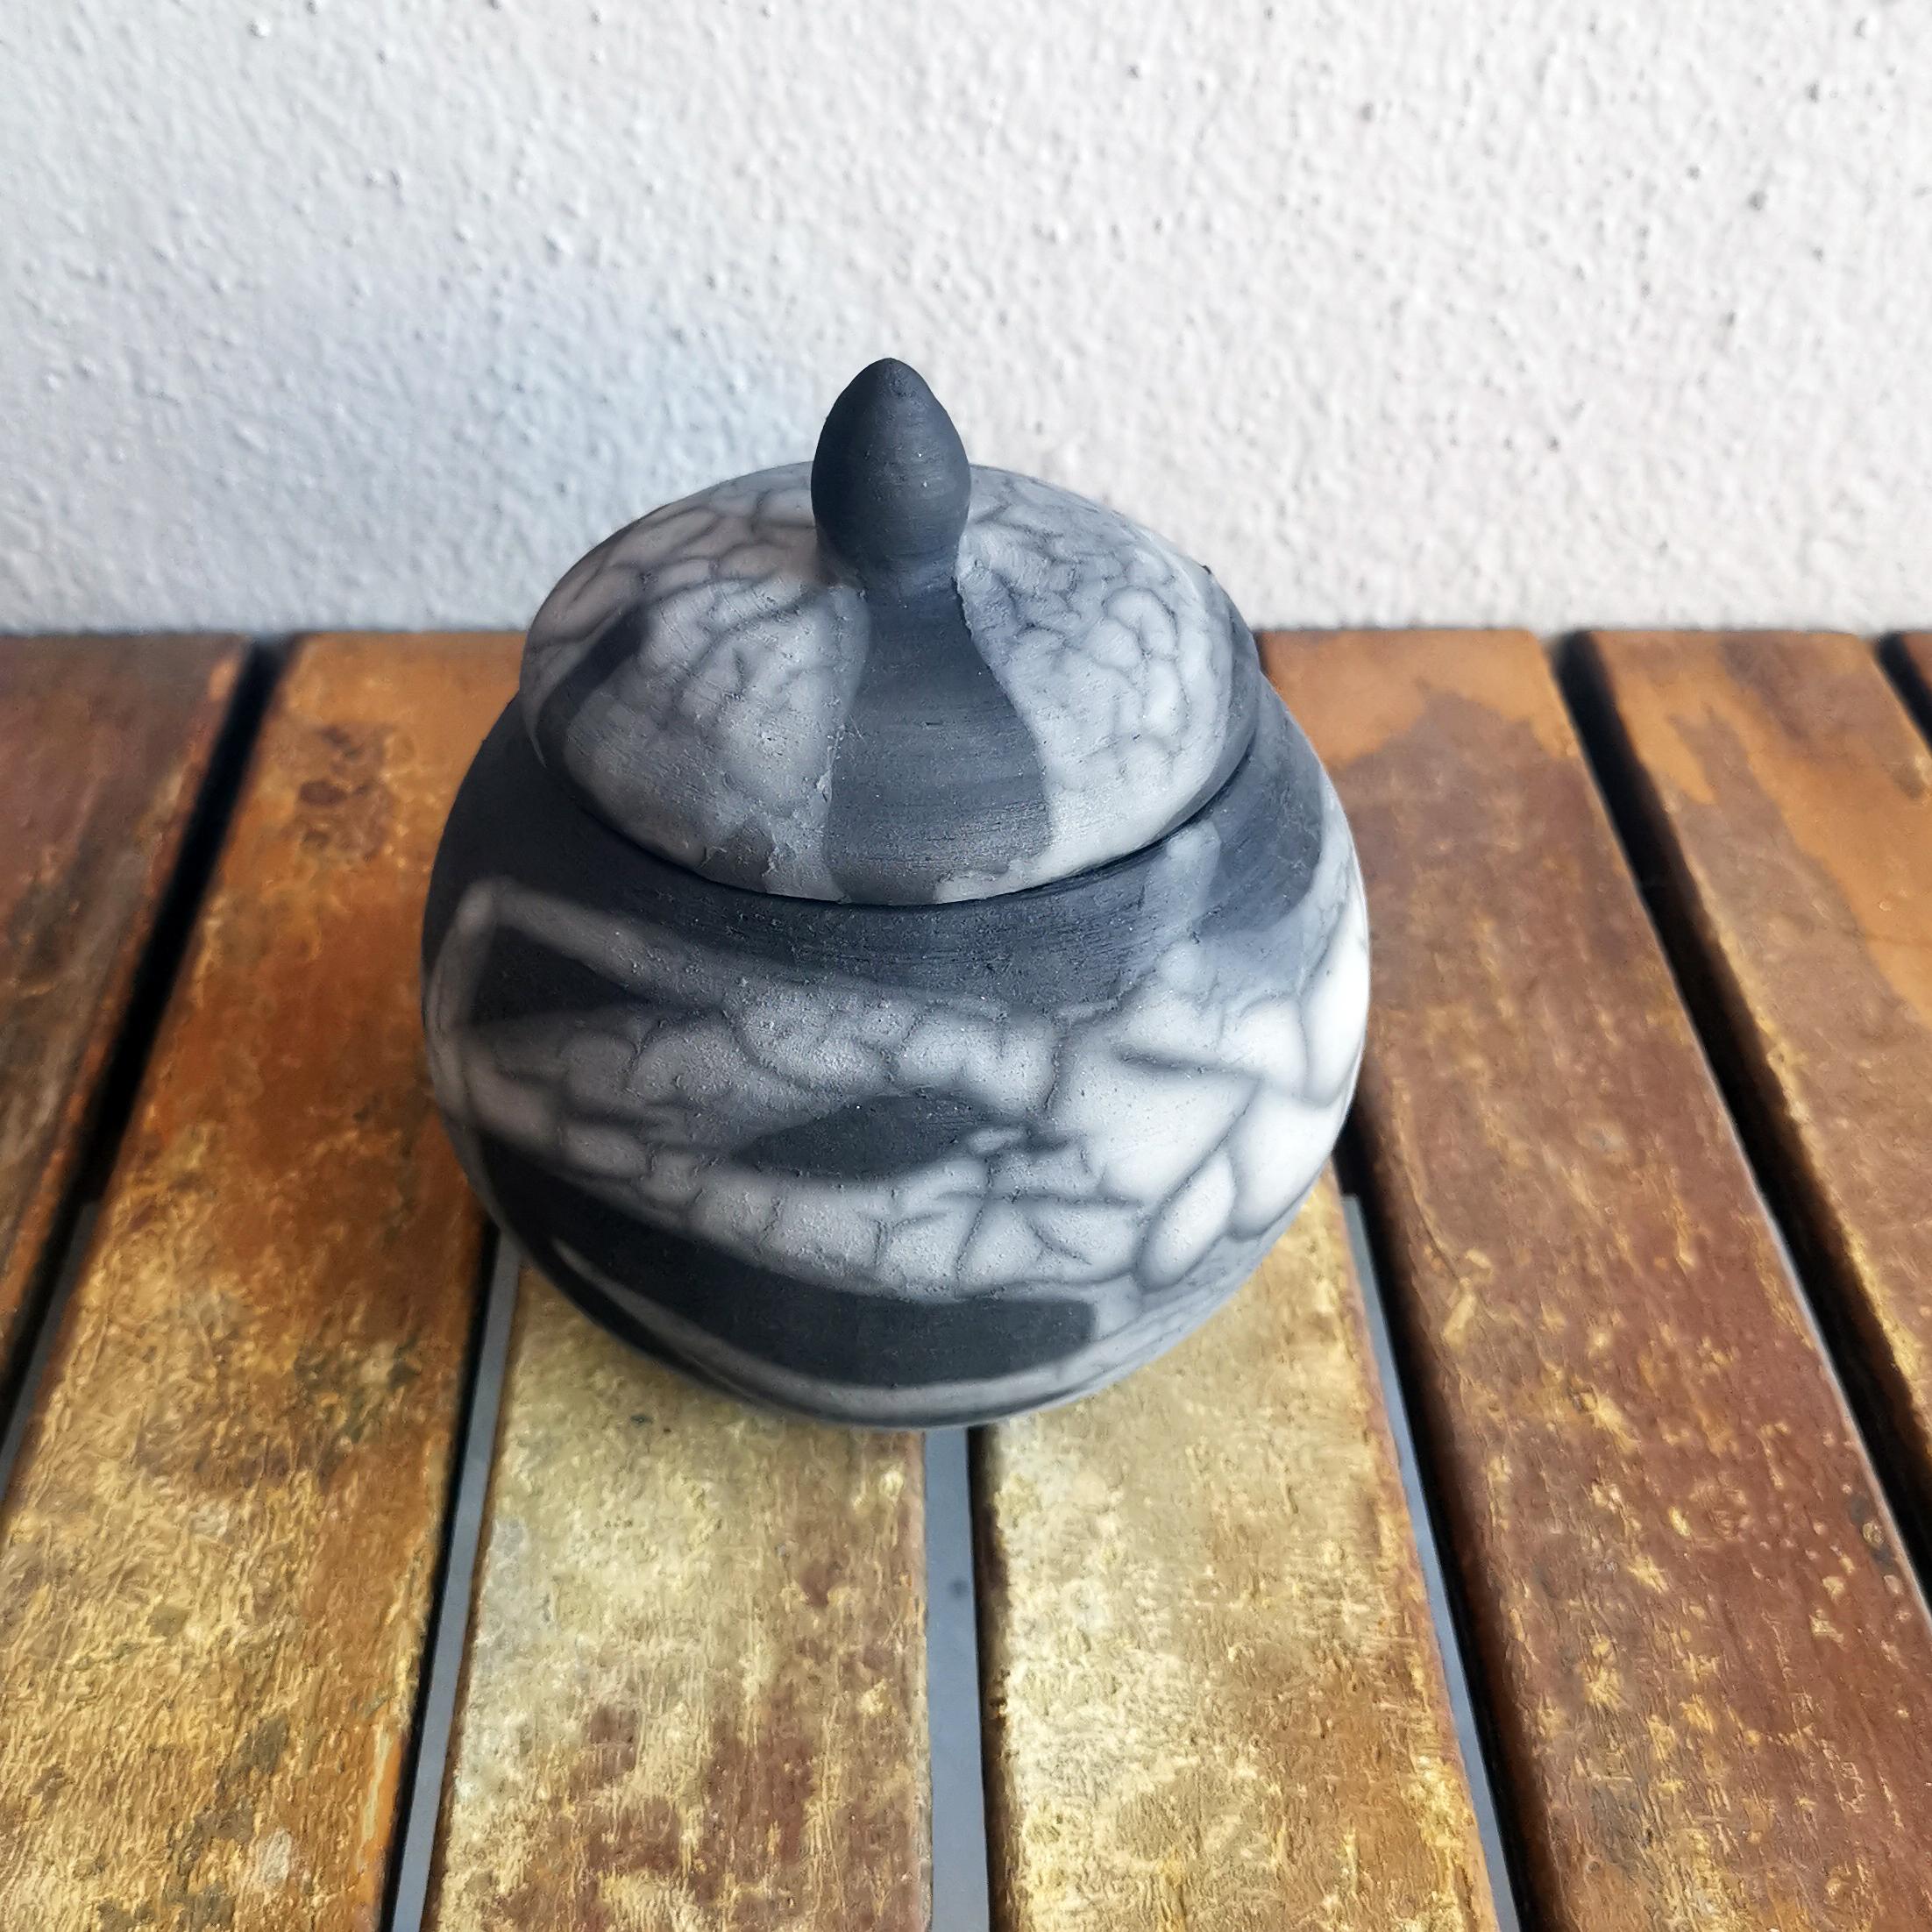 Kioku - Remembrance 

The Kioku urn is a small palm sized urn that is formed with an organic spherical shape. This urn is very suitable for the remains of pets, or for shared remembrance among family members.

Height : 3.3 in ( 8.5cm )
Width :